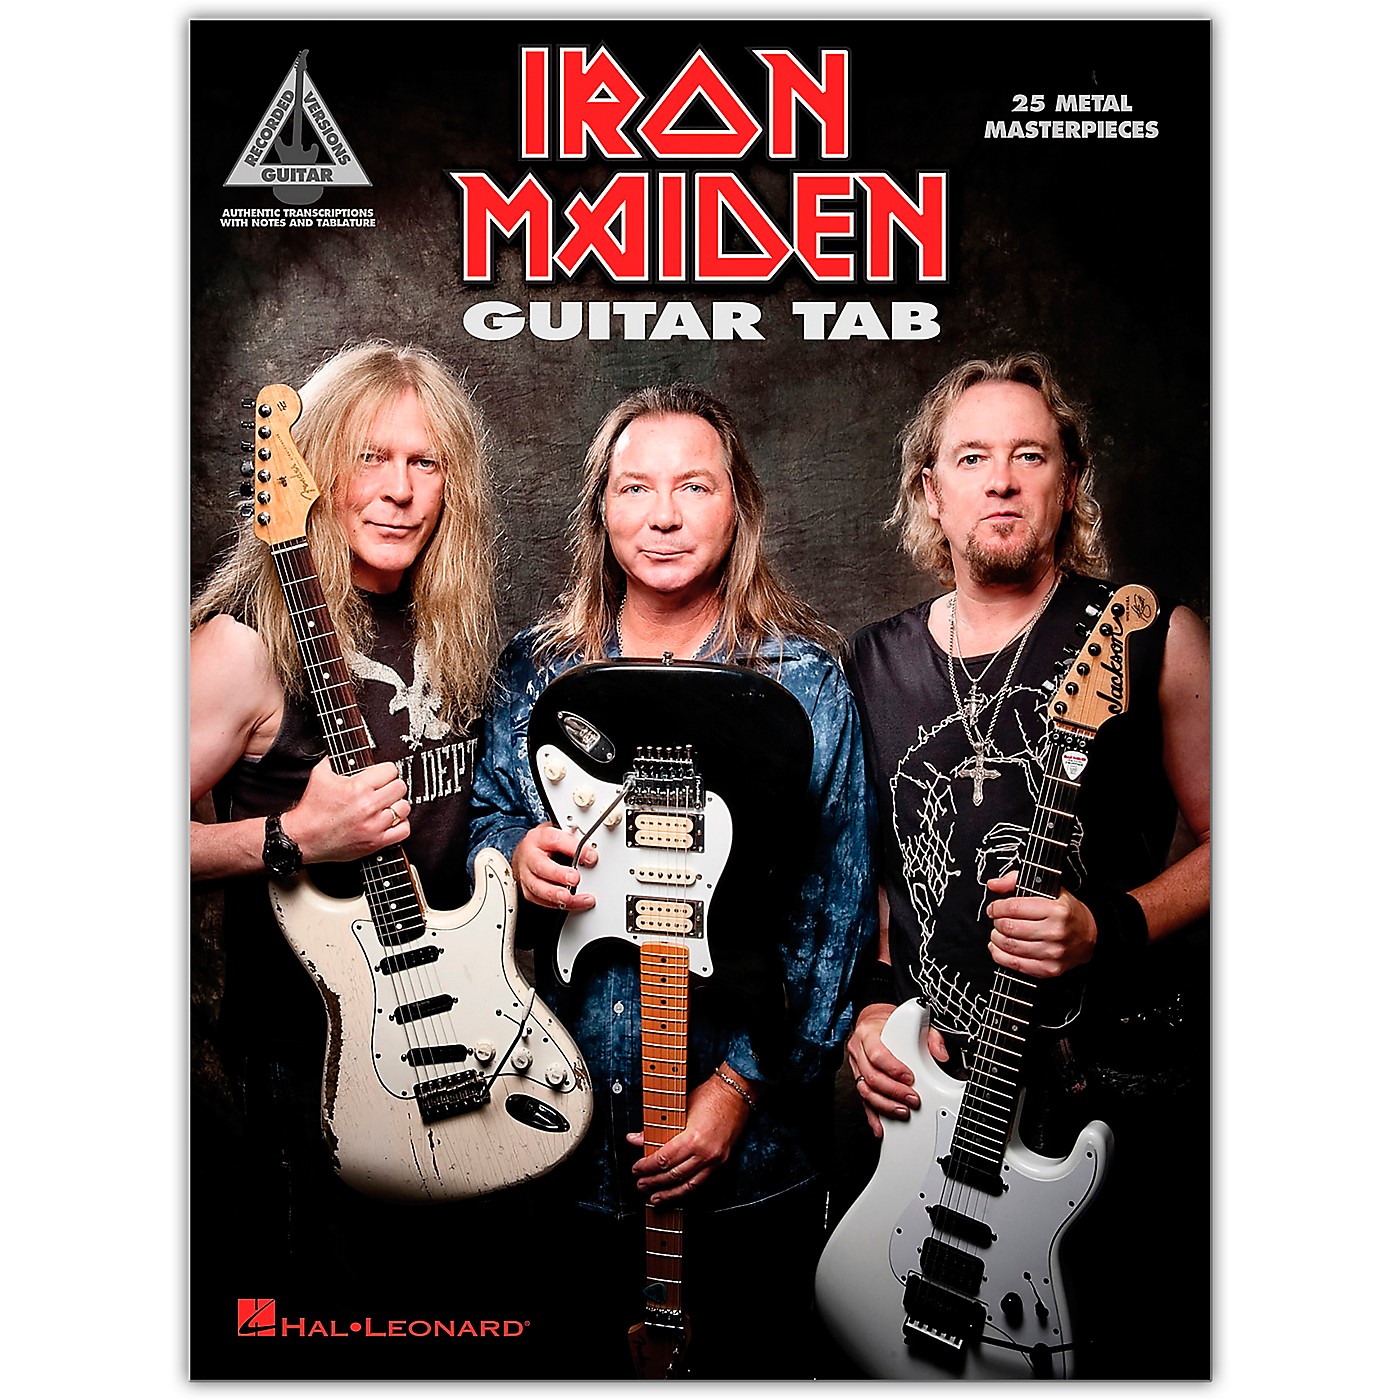 Hal Leonard Iron Maiden - Guitar Tab (25 Metal Masterpieces) Guitar Recorded Version Series Softcover by Iron Maiden thumbnail